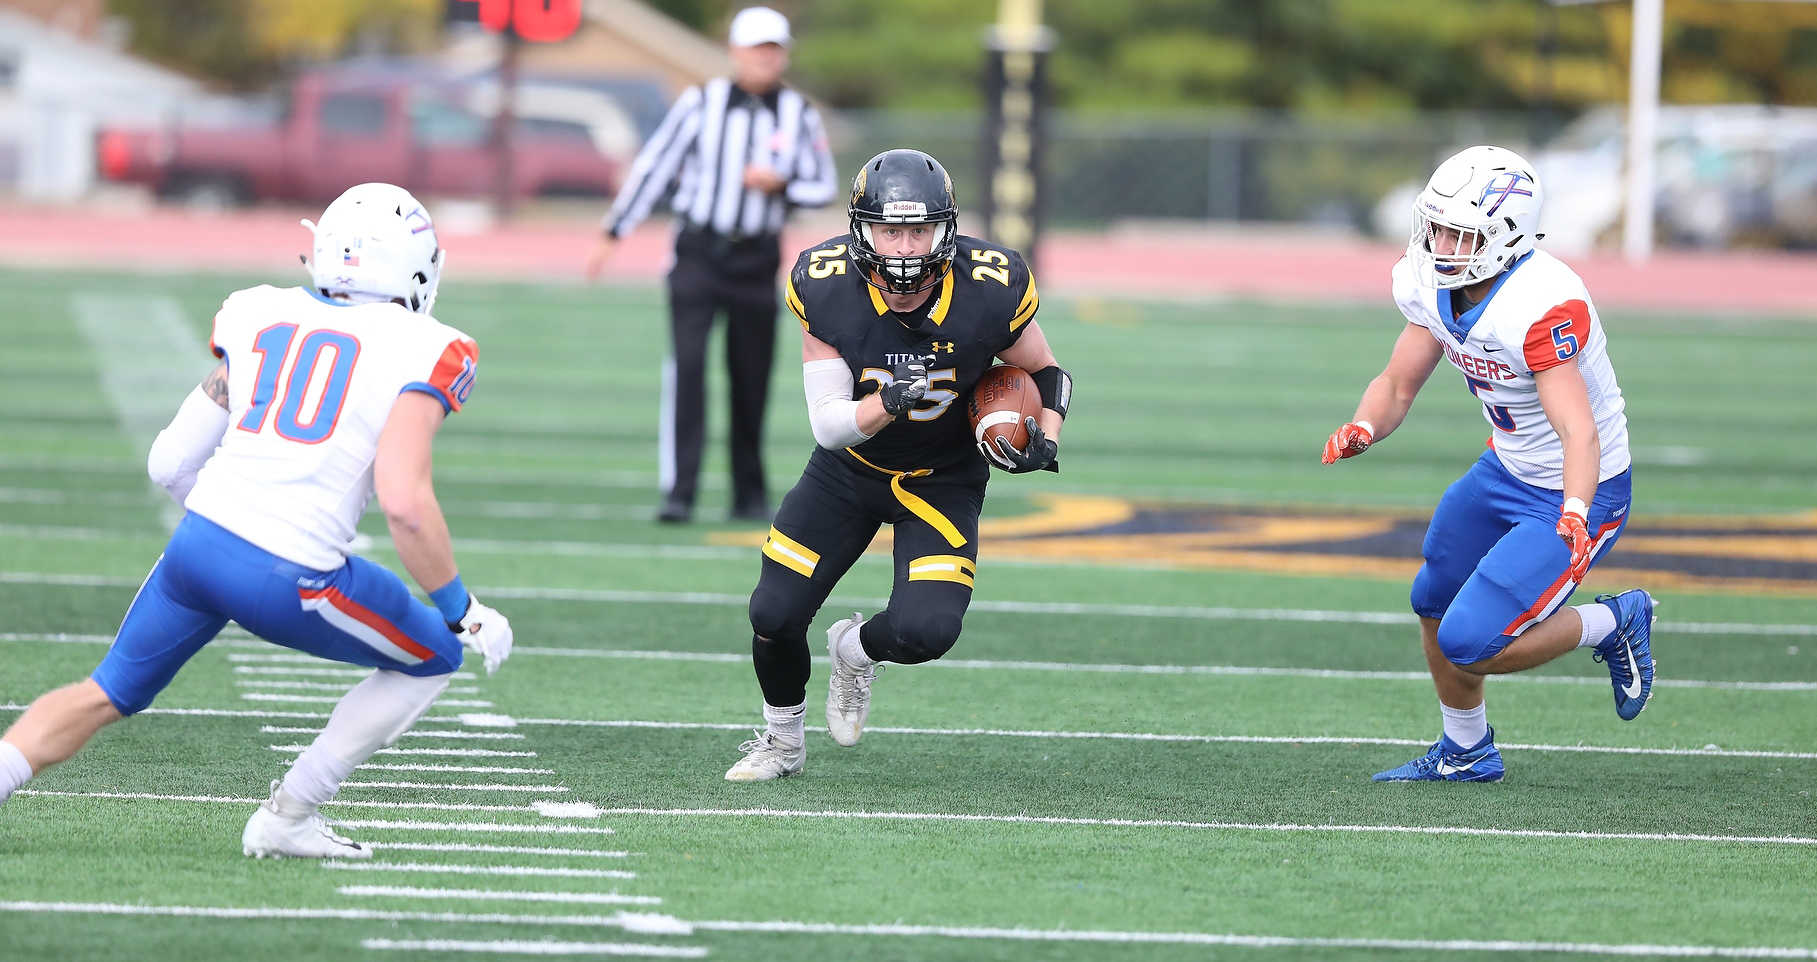 Dom Todarello compiled 176 all-purpose yards (75 rushing, 71 receiving, 30 punt return) against the Pioneers.